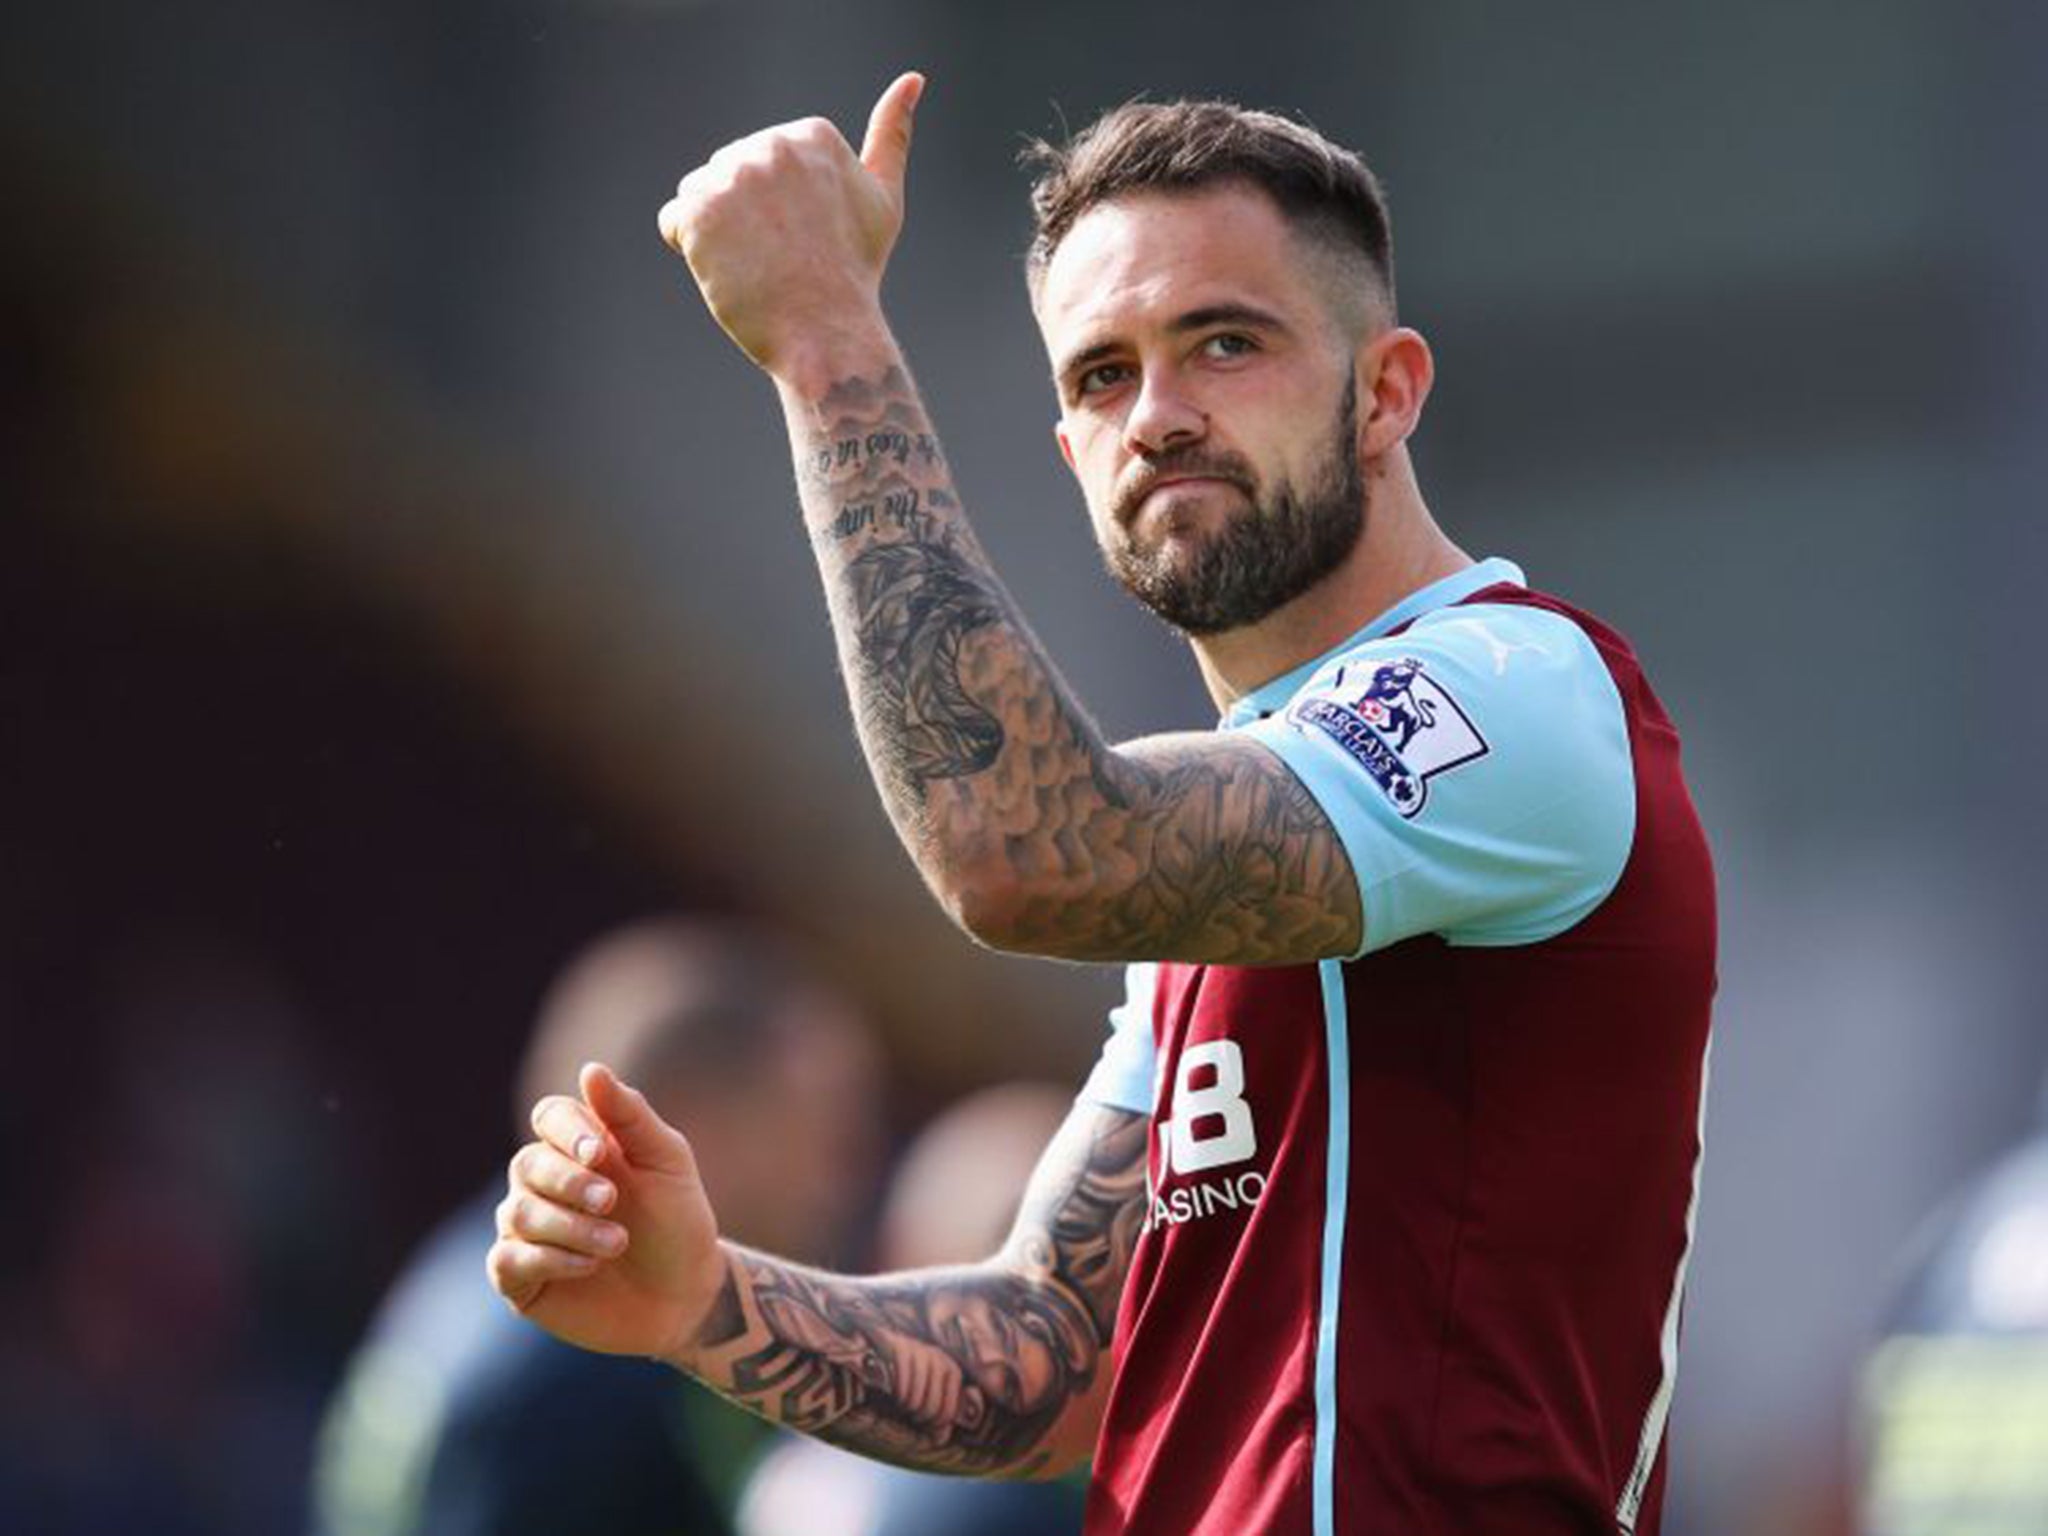 Danny Ings has spoken about his move to Liverpool